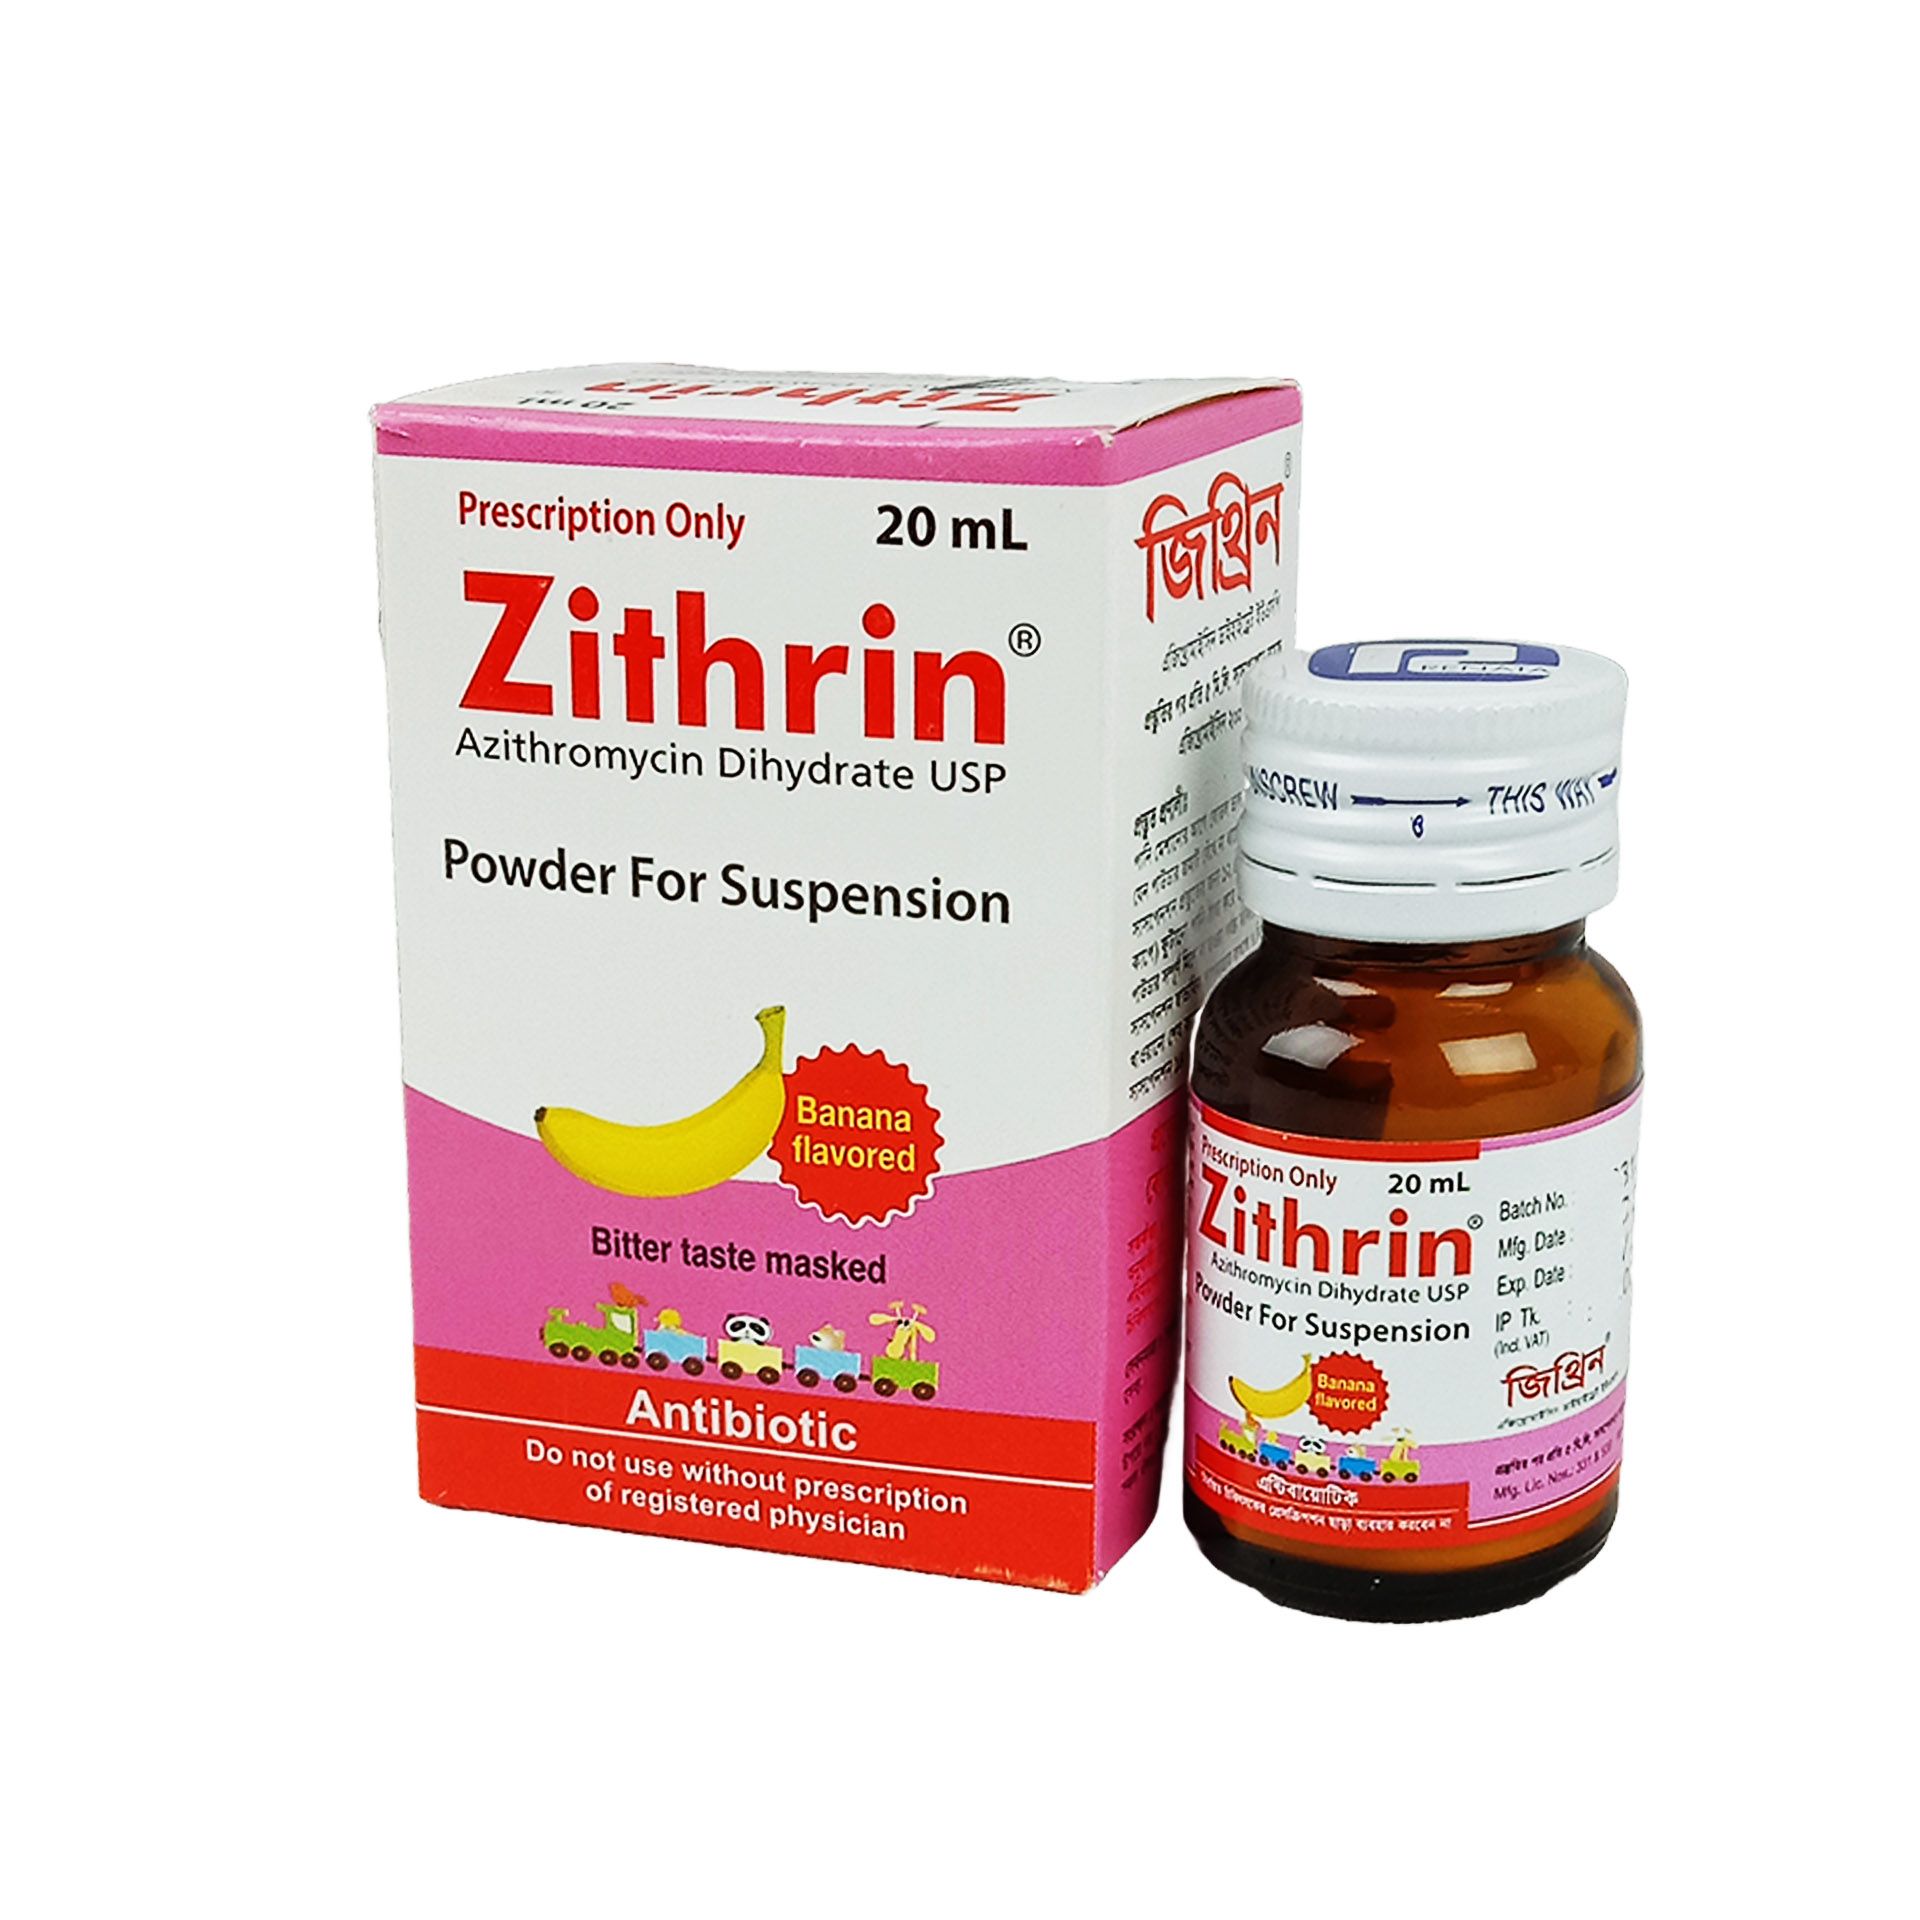 Zithrin 20ml Syrup 200mg/5ml Powder for Suspension